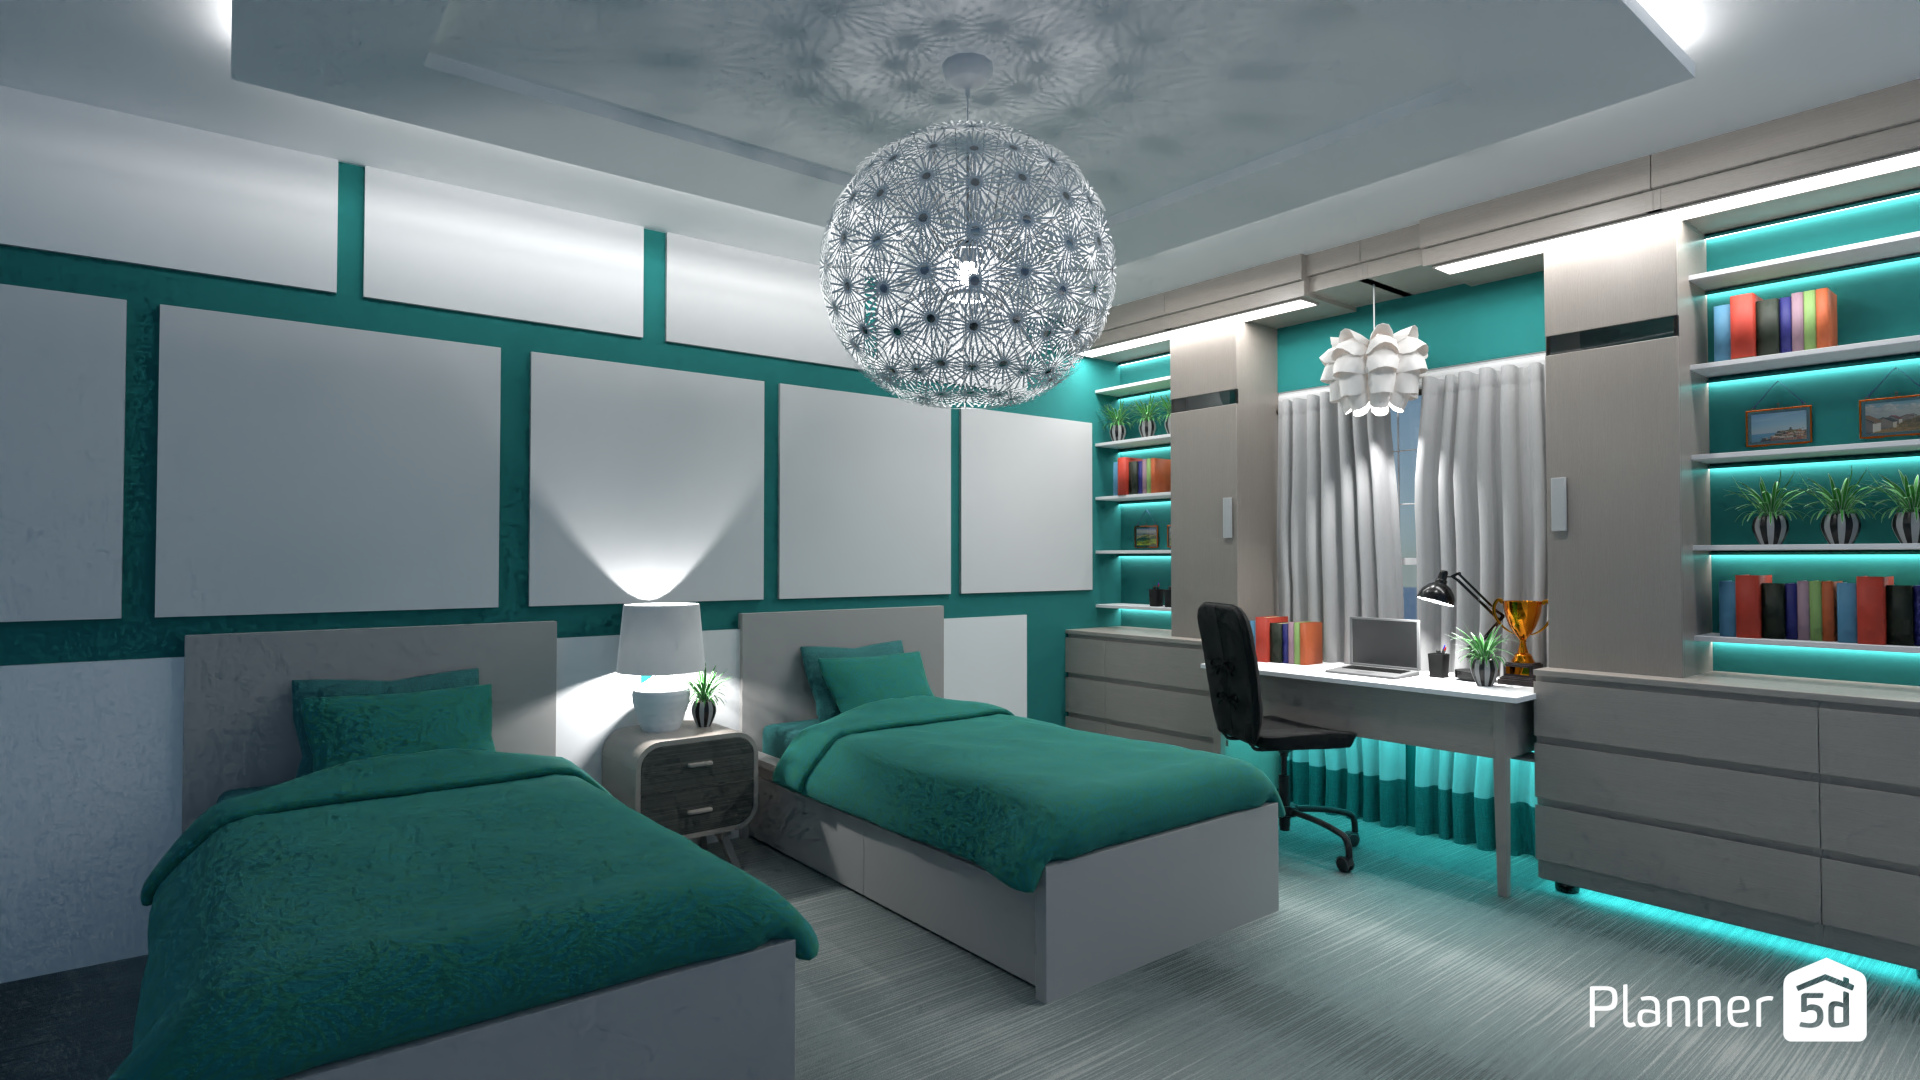 my dream teenager bedroom 20576719 by Nathan image